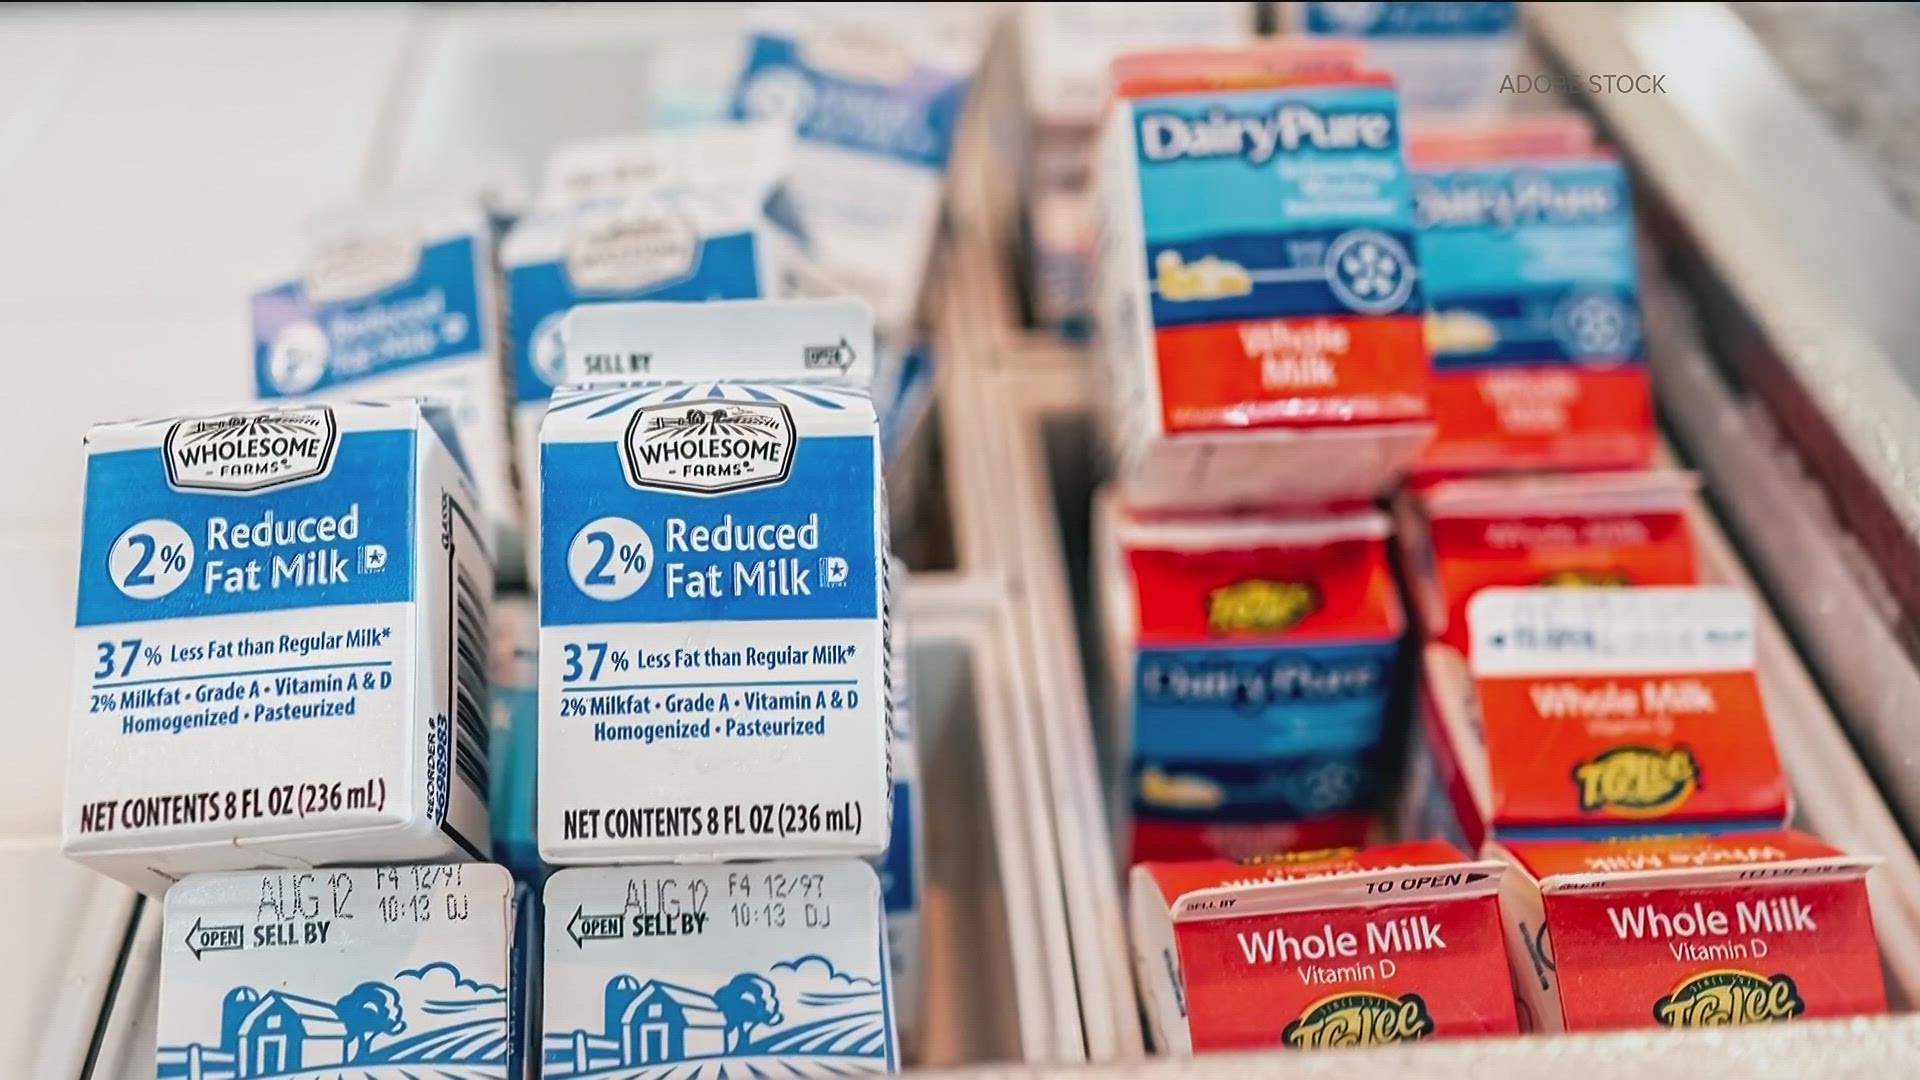 Many school districts in the U.S. are unable to obtain milk in half pints for their school meal programs due to the shortage of paper milk cartons.